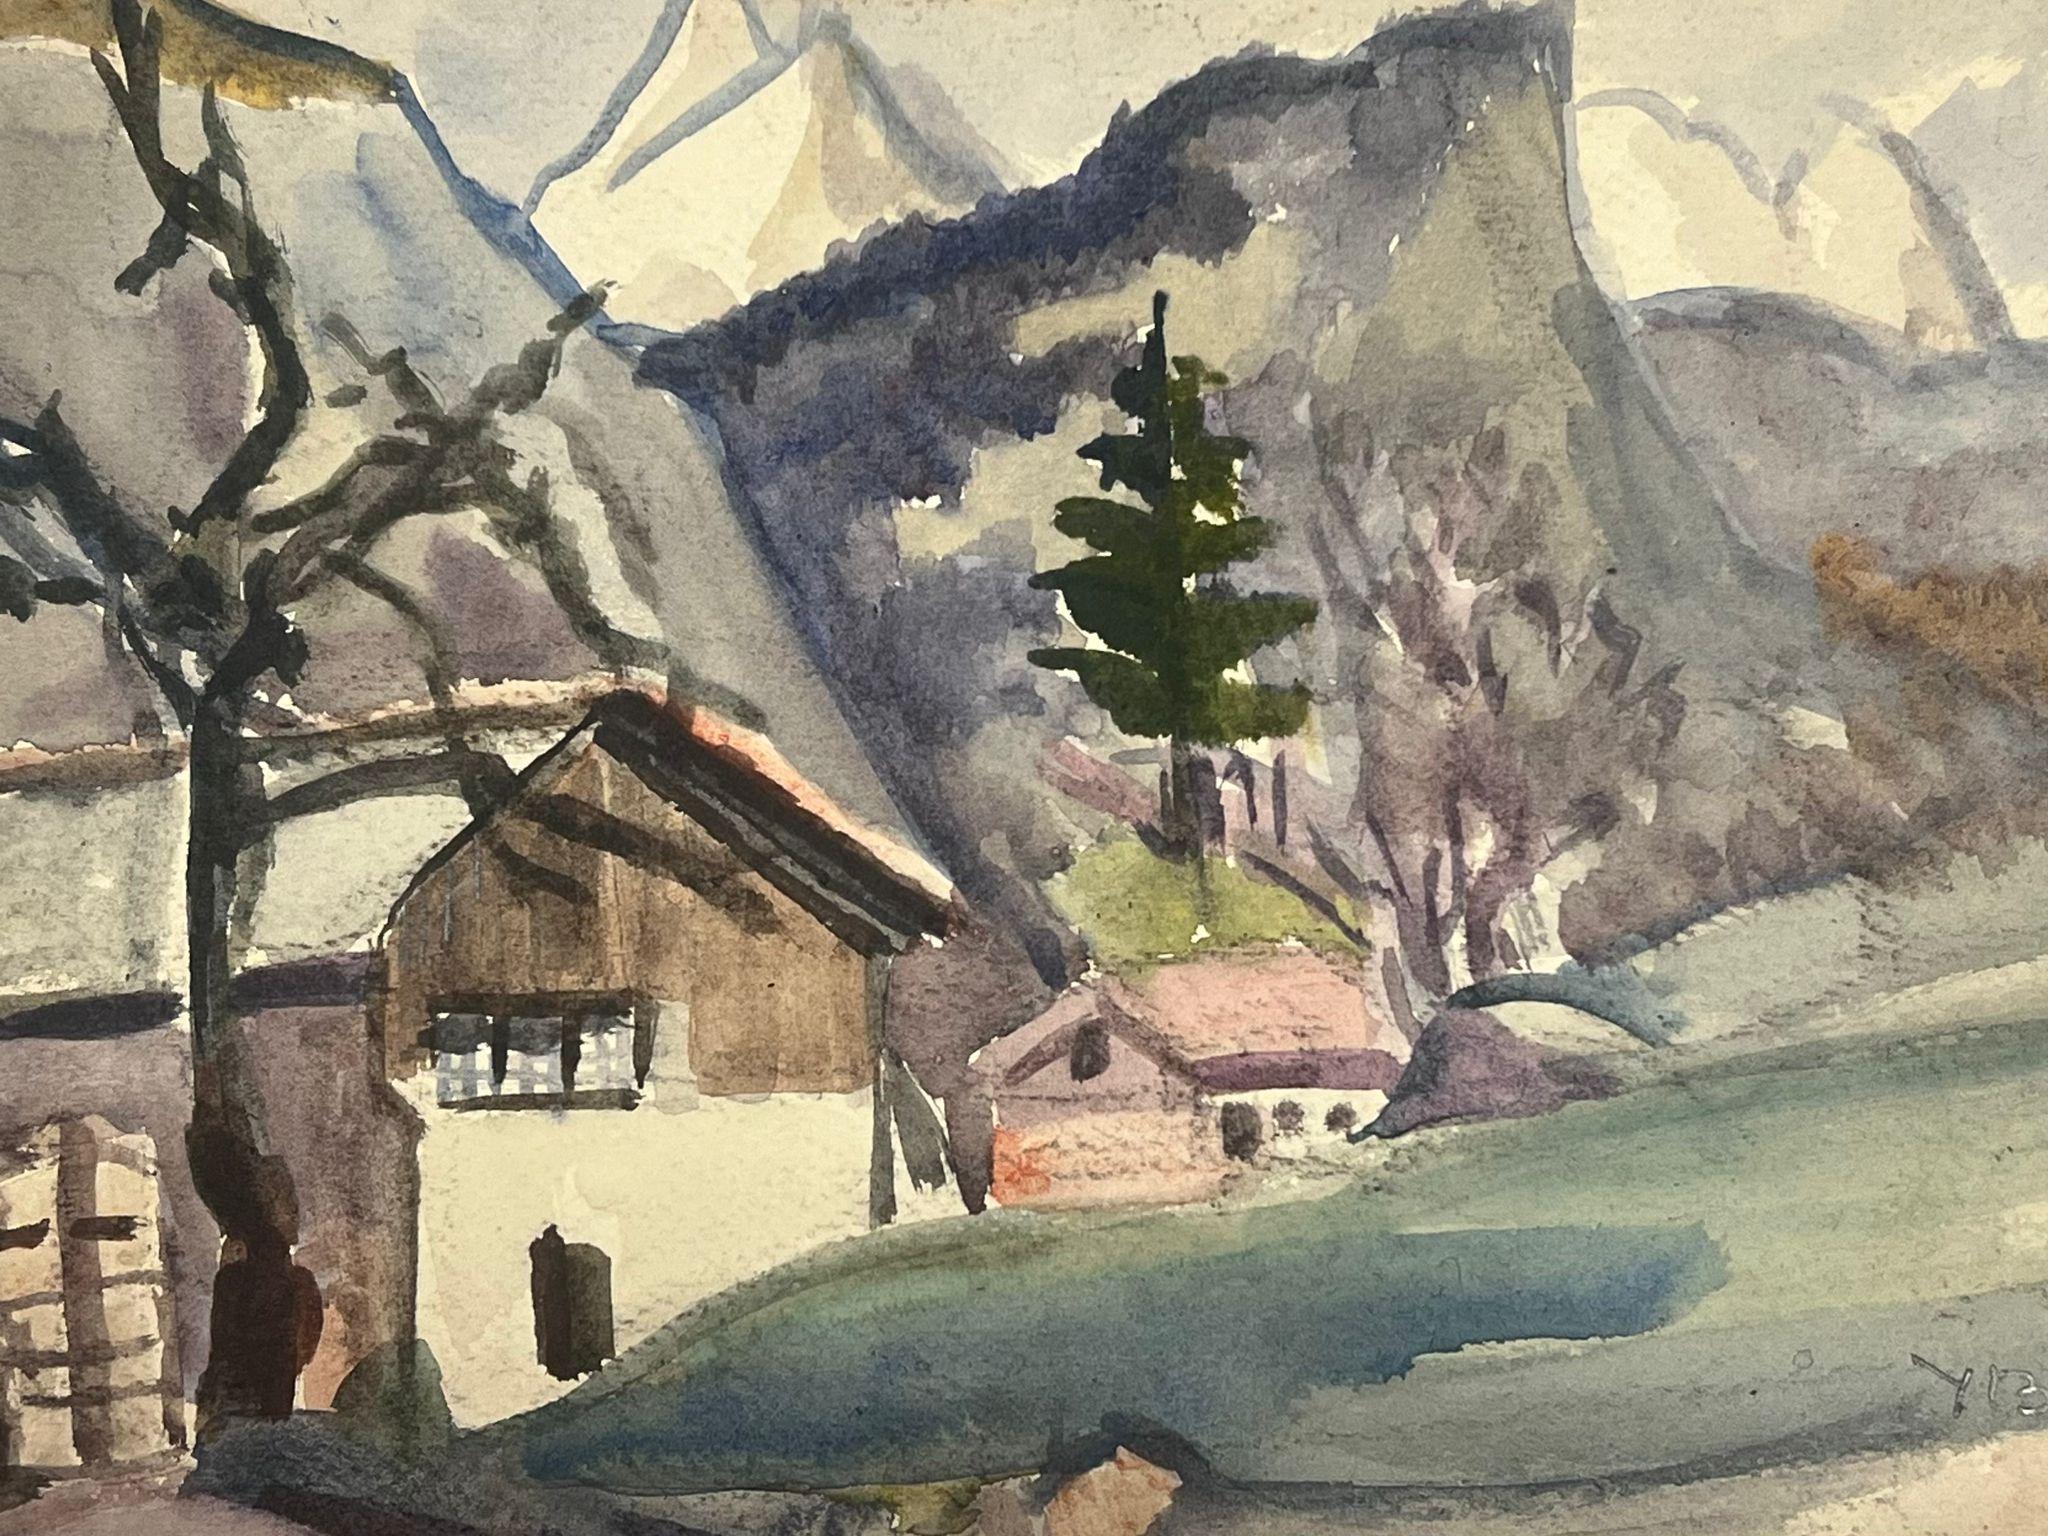 French Landscape
signed by Y. Blanchon, French 1950's Impressionist 
watercolour on artist paper, unframed
painting: 7 x 10 inches
inscribed verso
provenance: from a large private collection of this artists work in Northern France
condition: